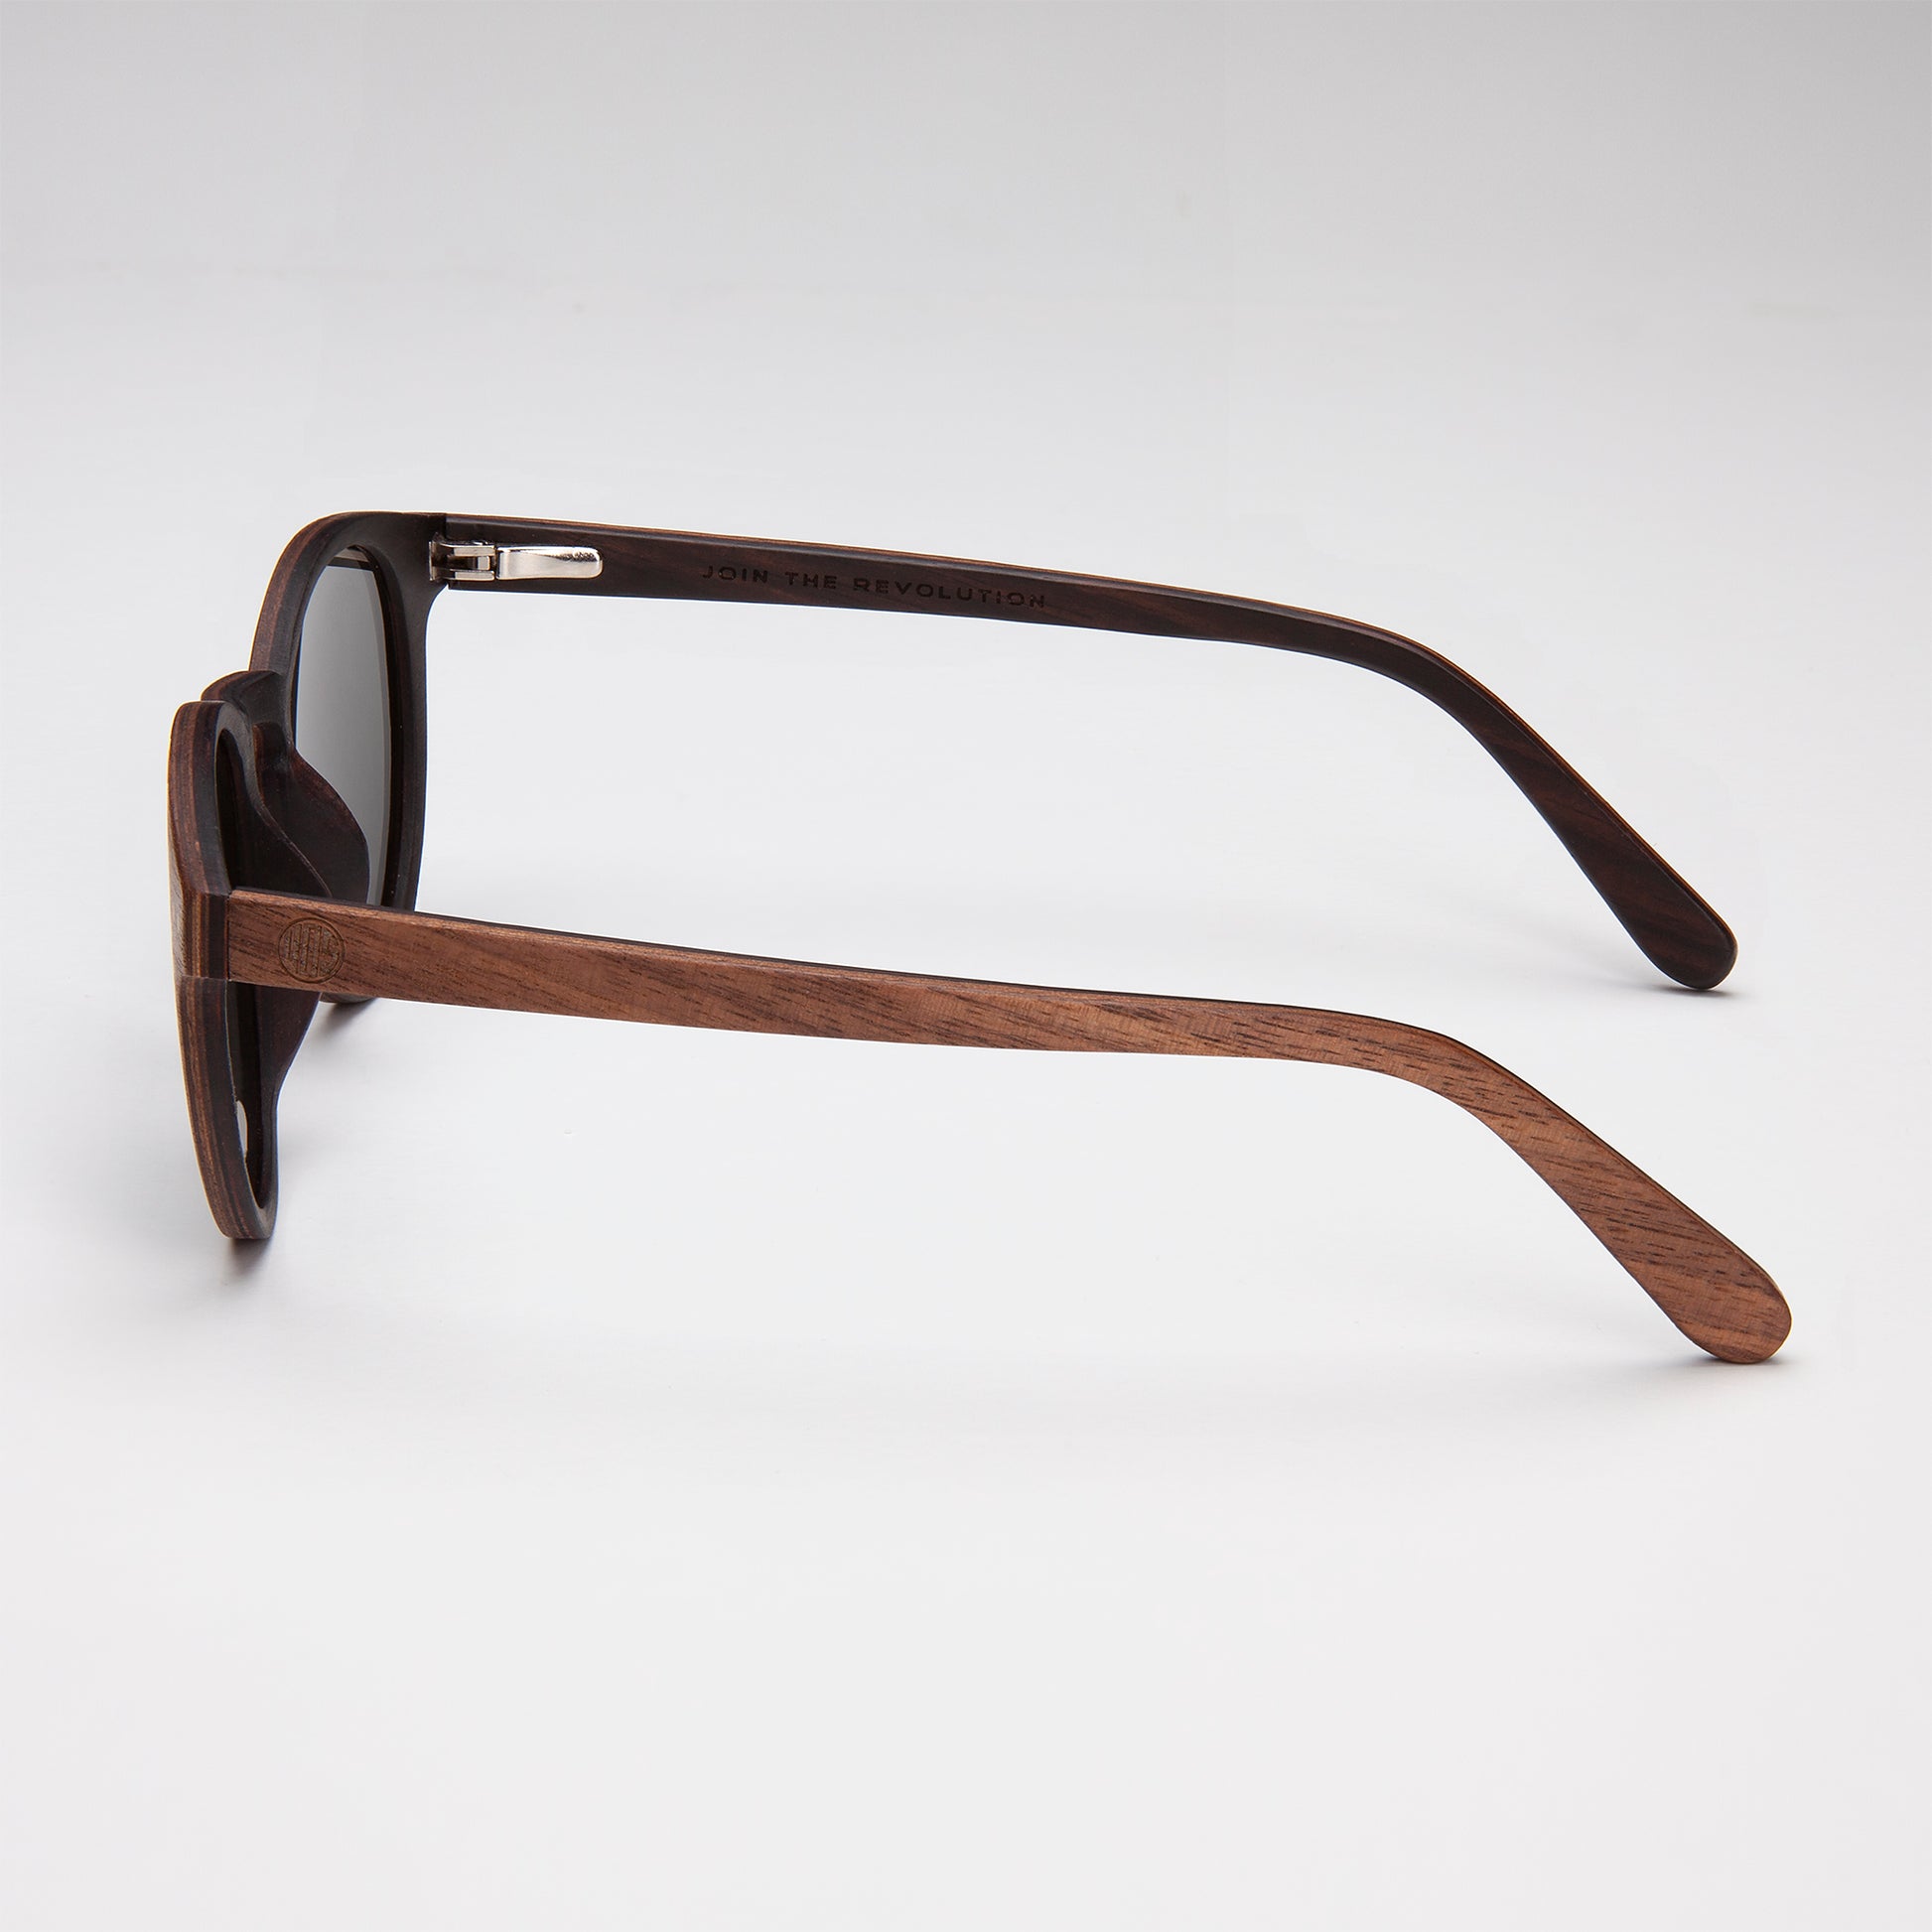 Eco Friendly SunglassesPearl Silver MirrorCatch the summer rays in style with Pearl sunglasses! Featuring polarized mirrored lenses and stylish walnut wood veneer, they are perfect for long days at the beach